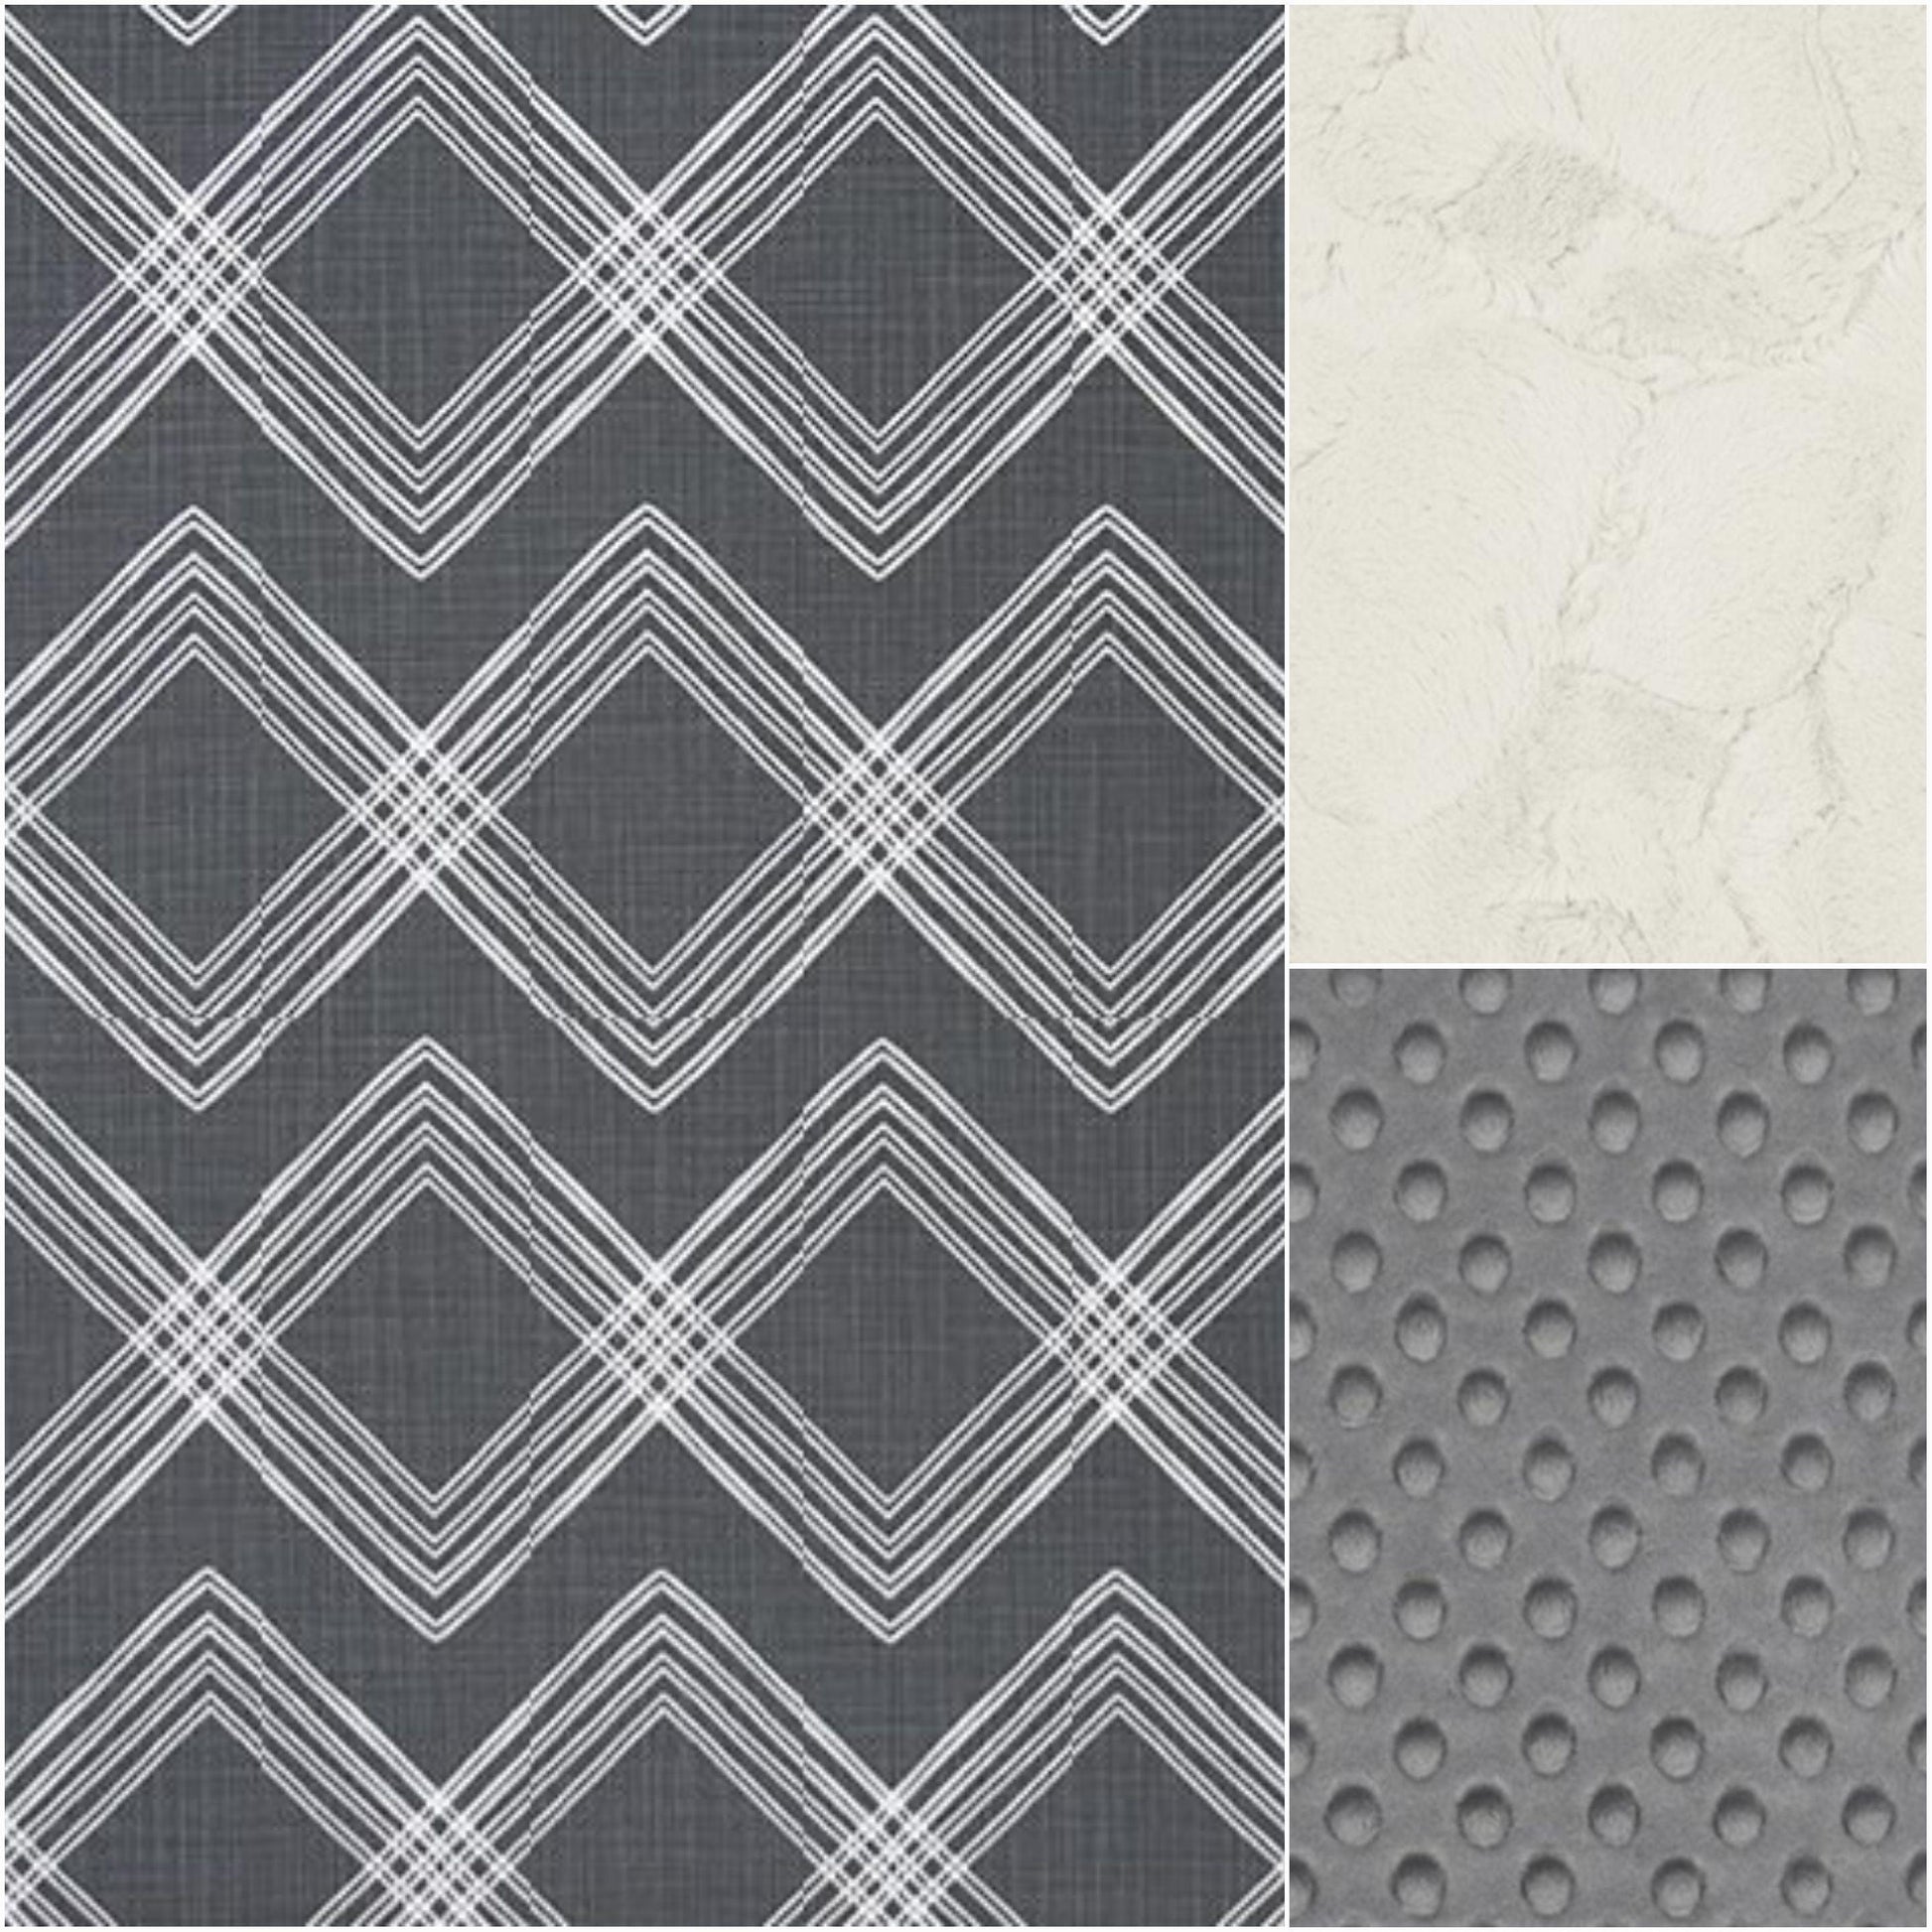 New Release Boy Crib Bedding - Colton Modern Collection - DBC Baby Bedding Co 